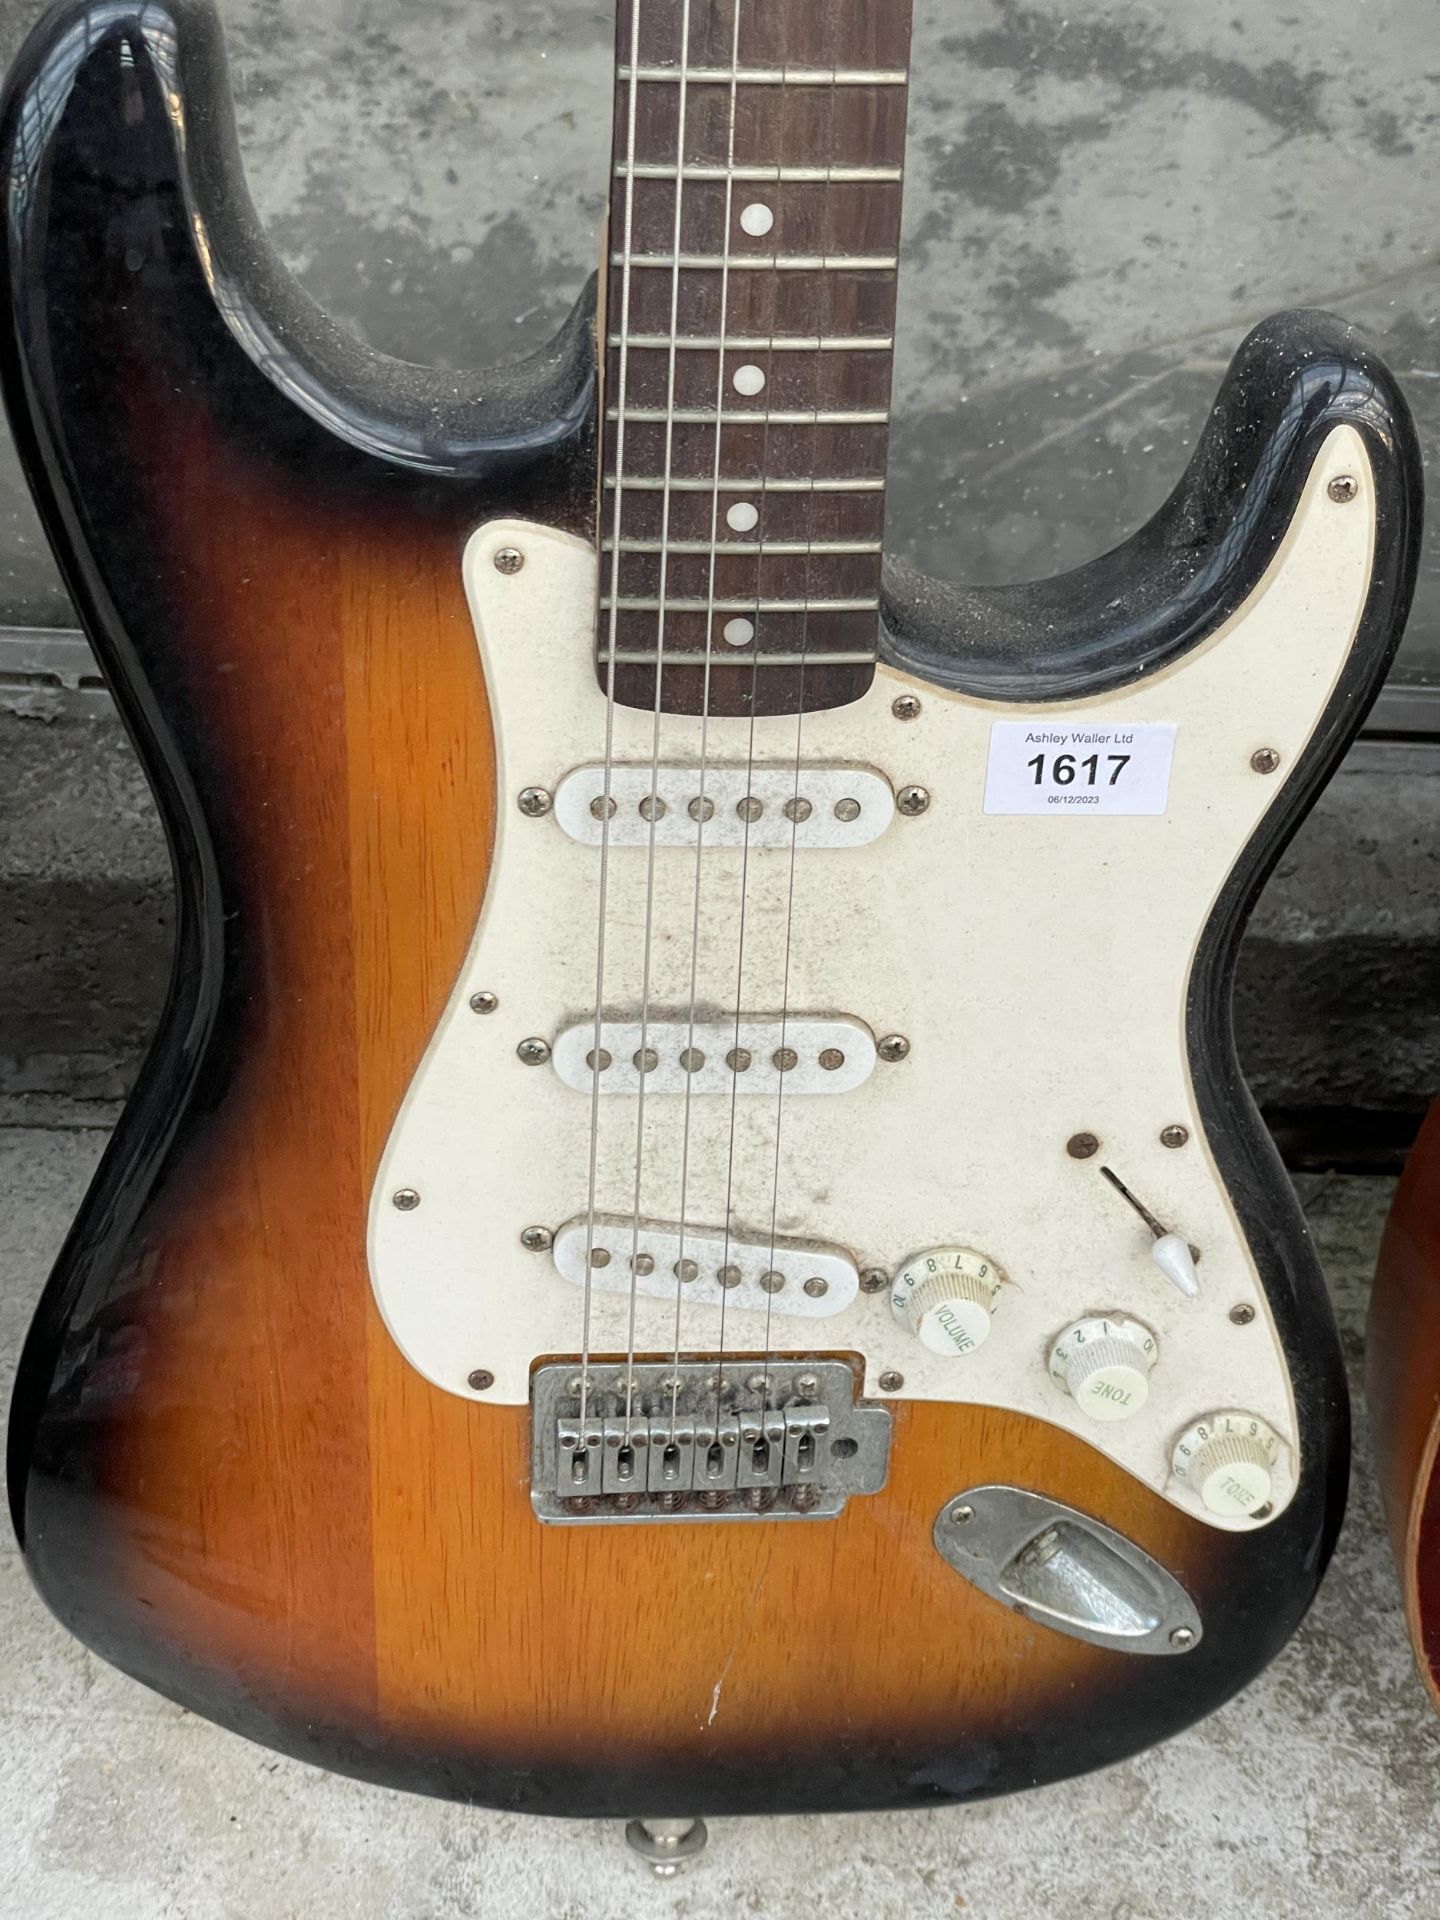 A SQUIRE STRAT FENDER ELECTRIC GUITAR - Image 2 of 3